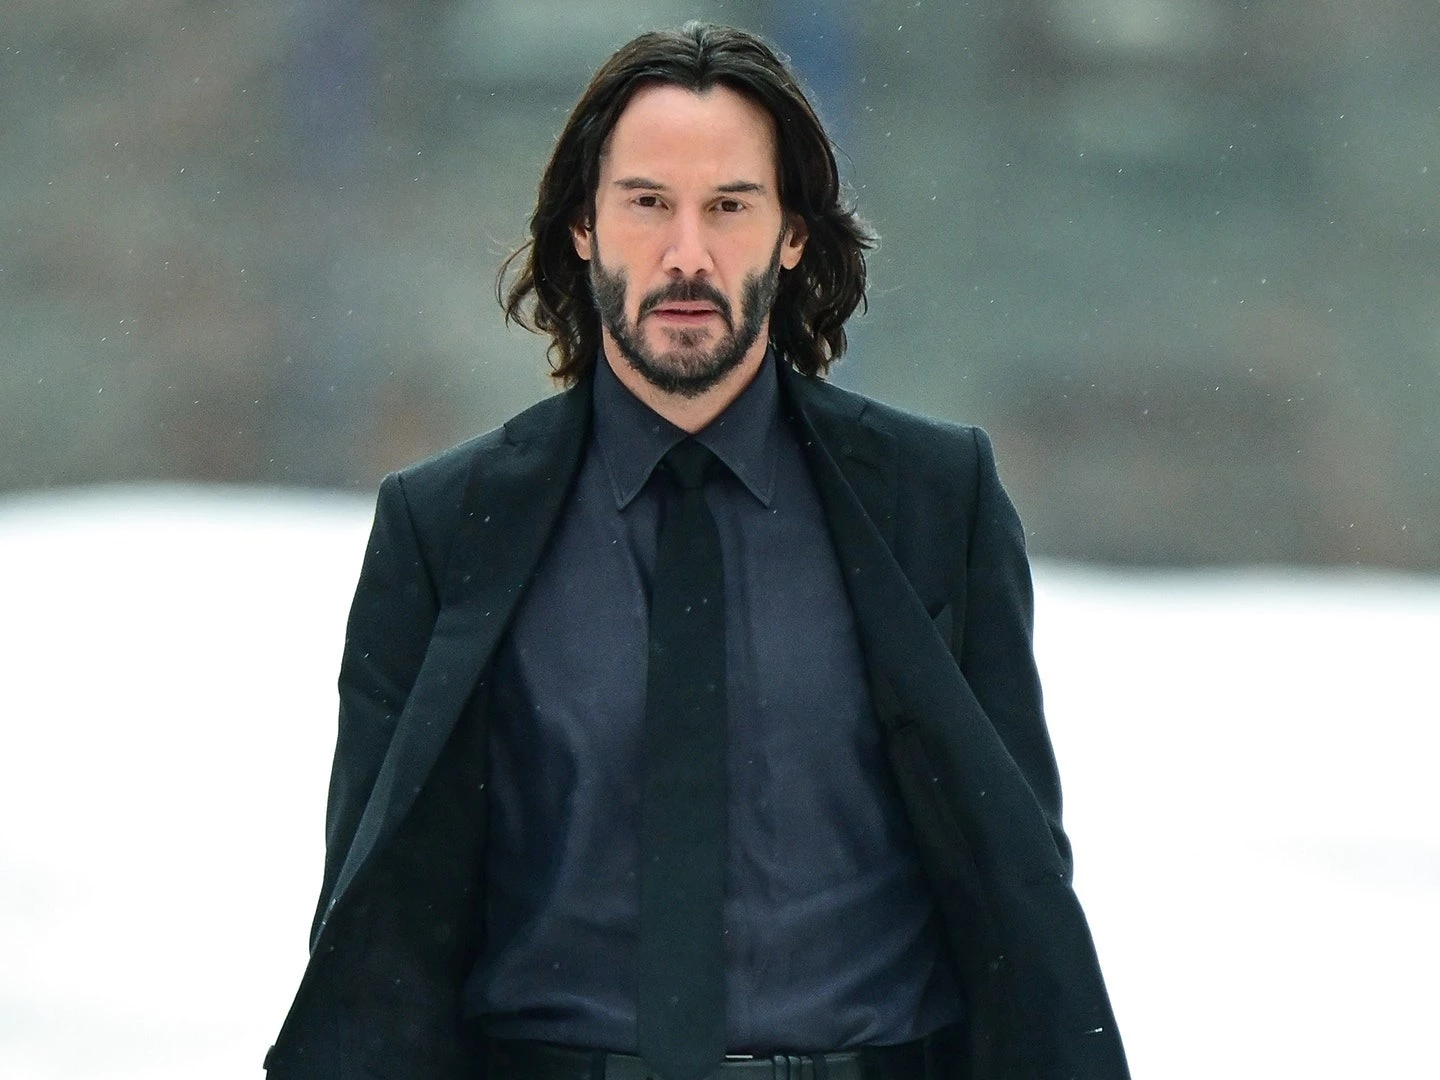 Keanu Reeves Is Nicknamed “The Wall” Thanks To His Hockey Prowess